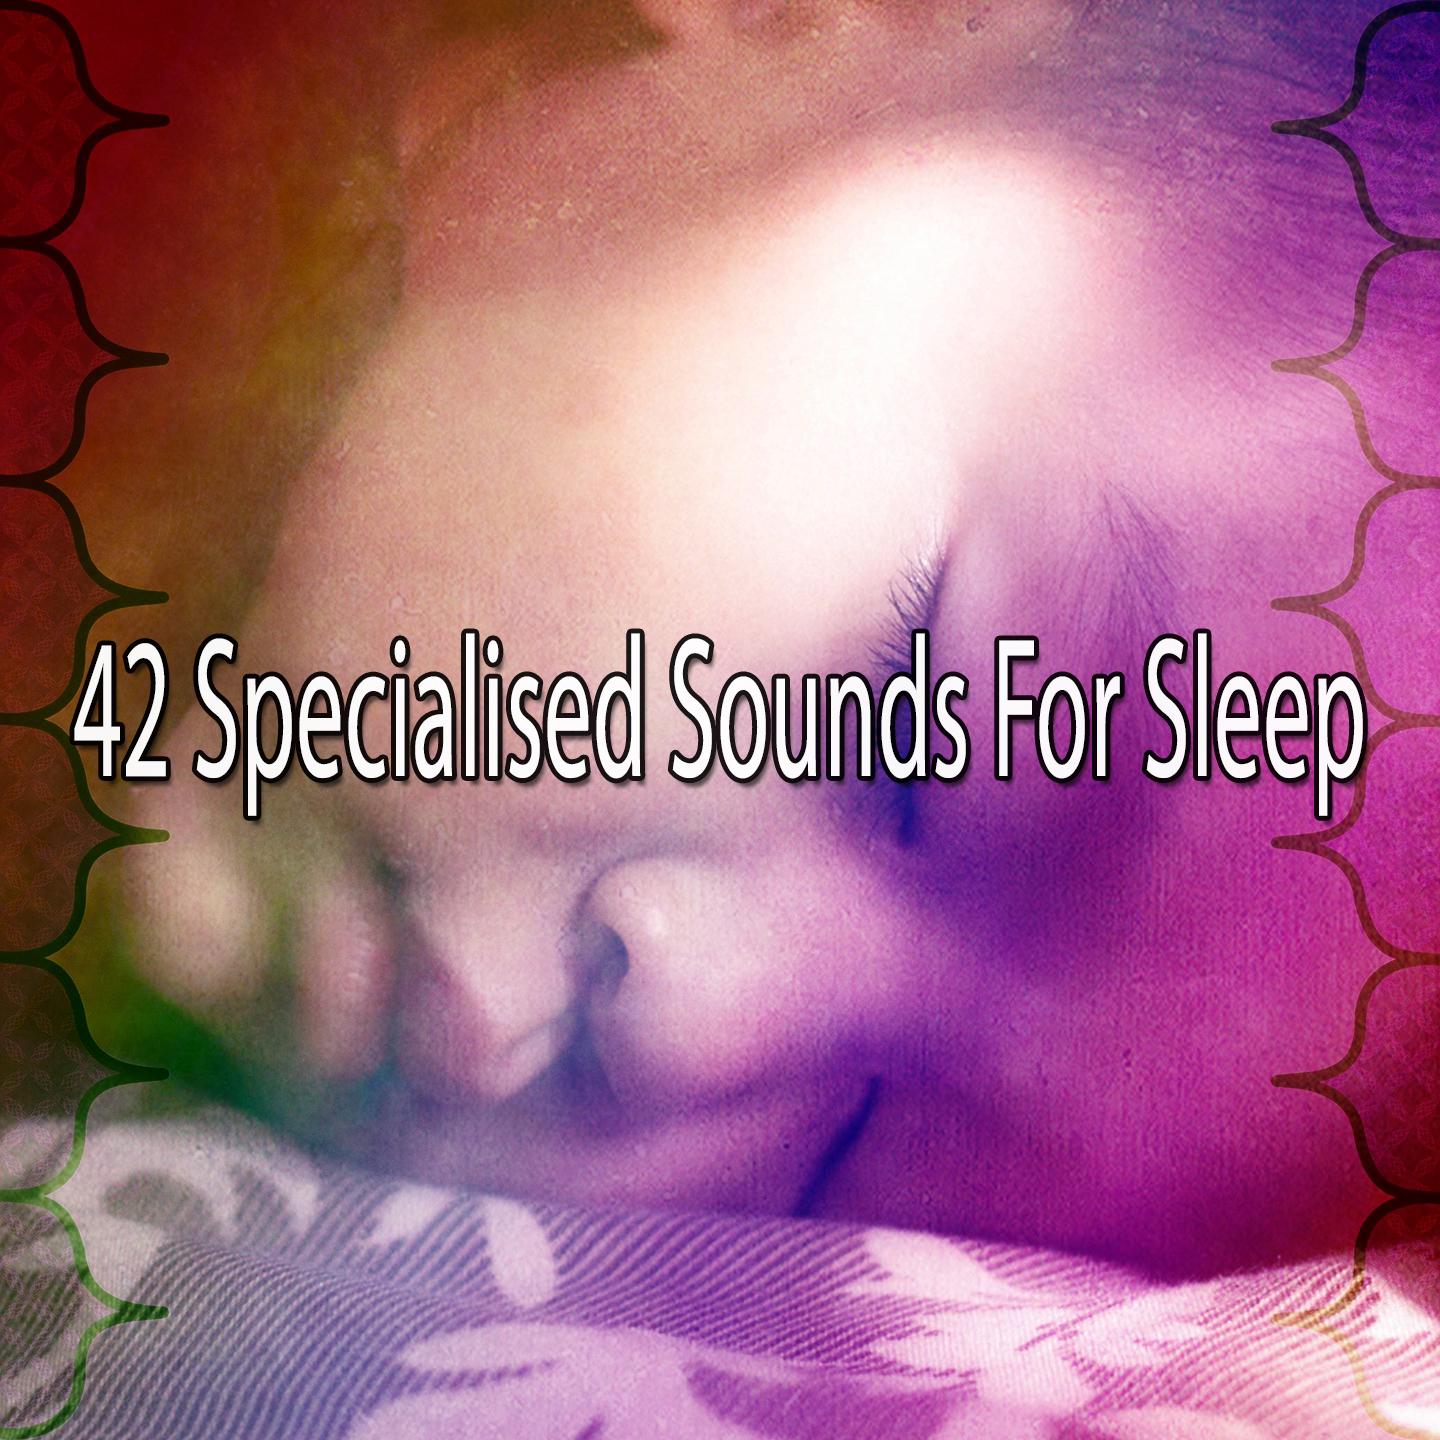 42 Specialised Sounds for Sleep